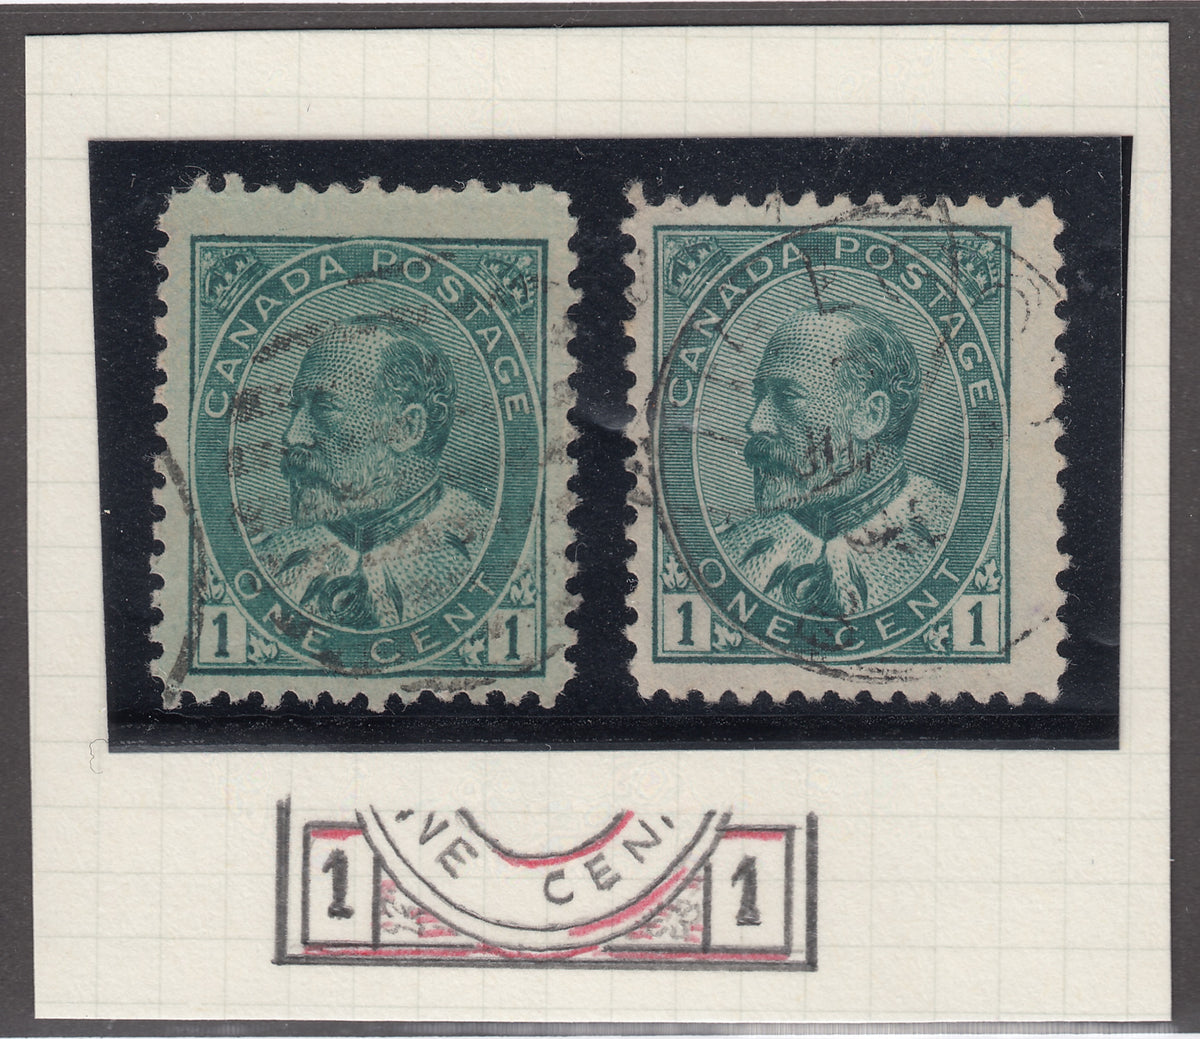 0089CA2111 - Canada #89 - Used, Re-Entry Set